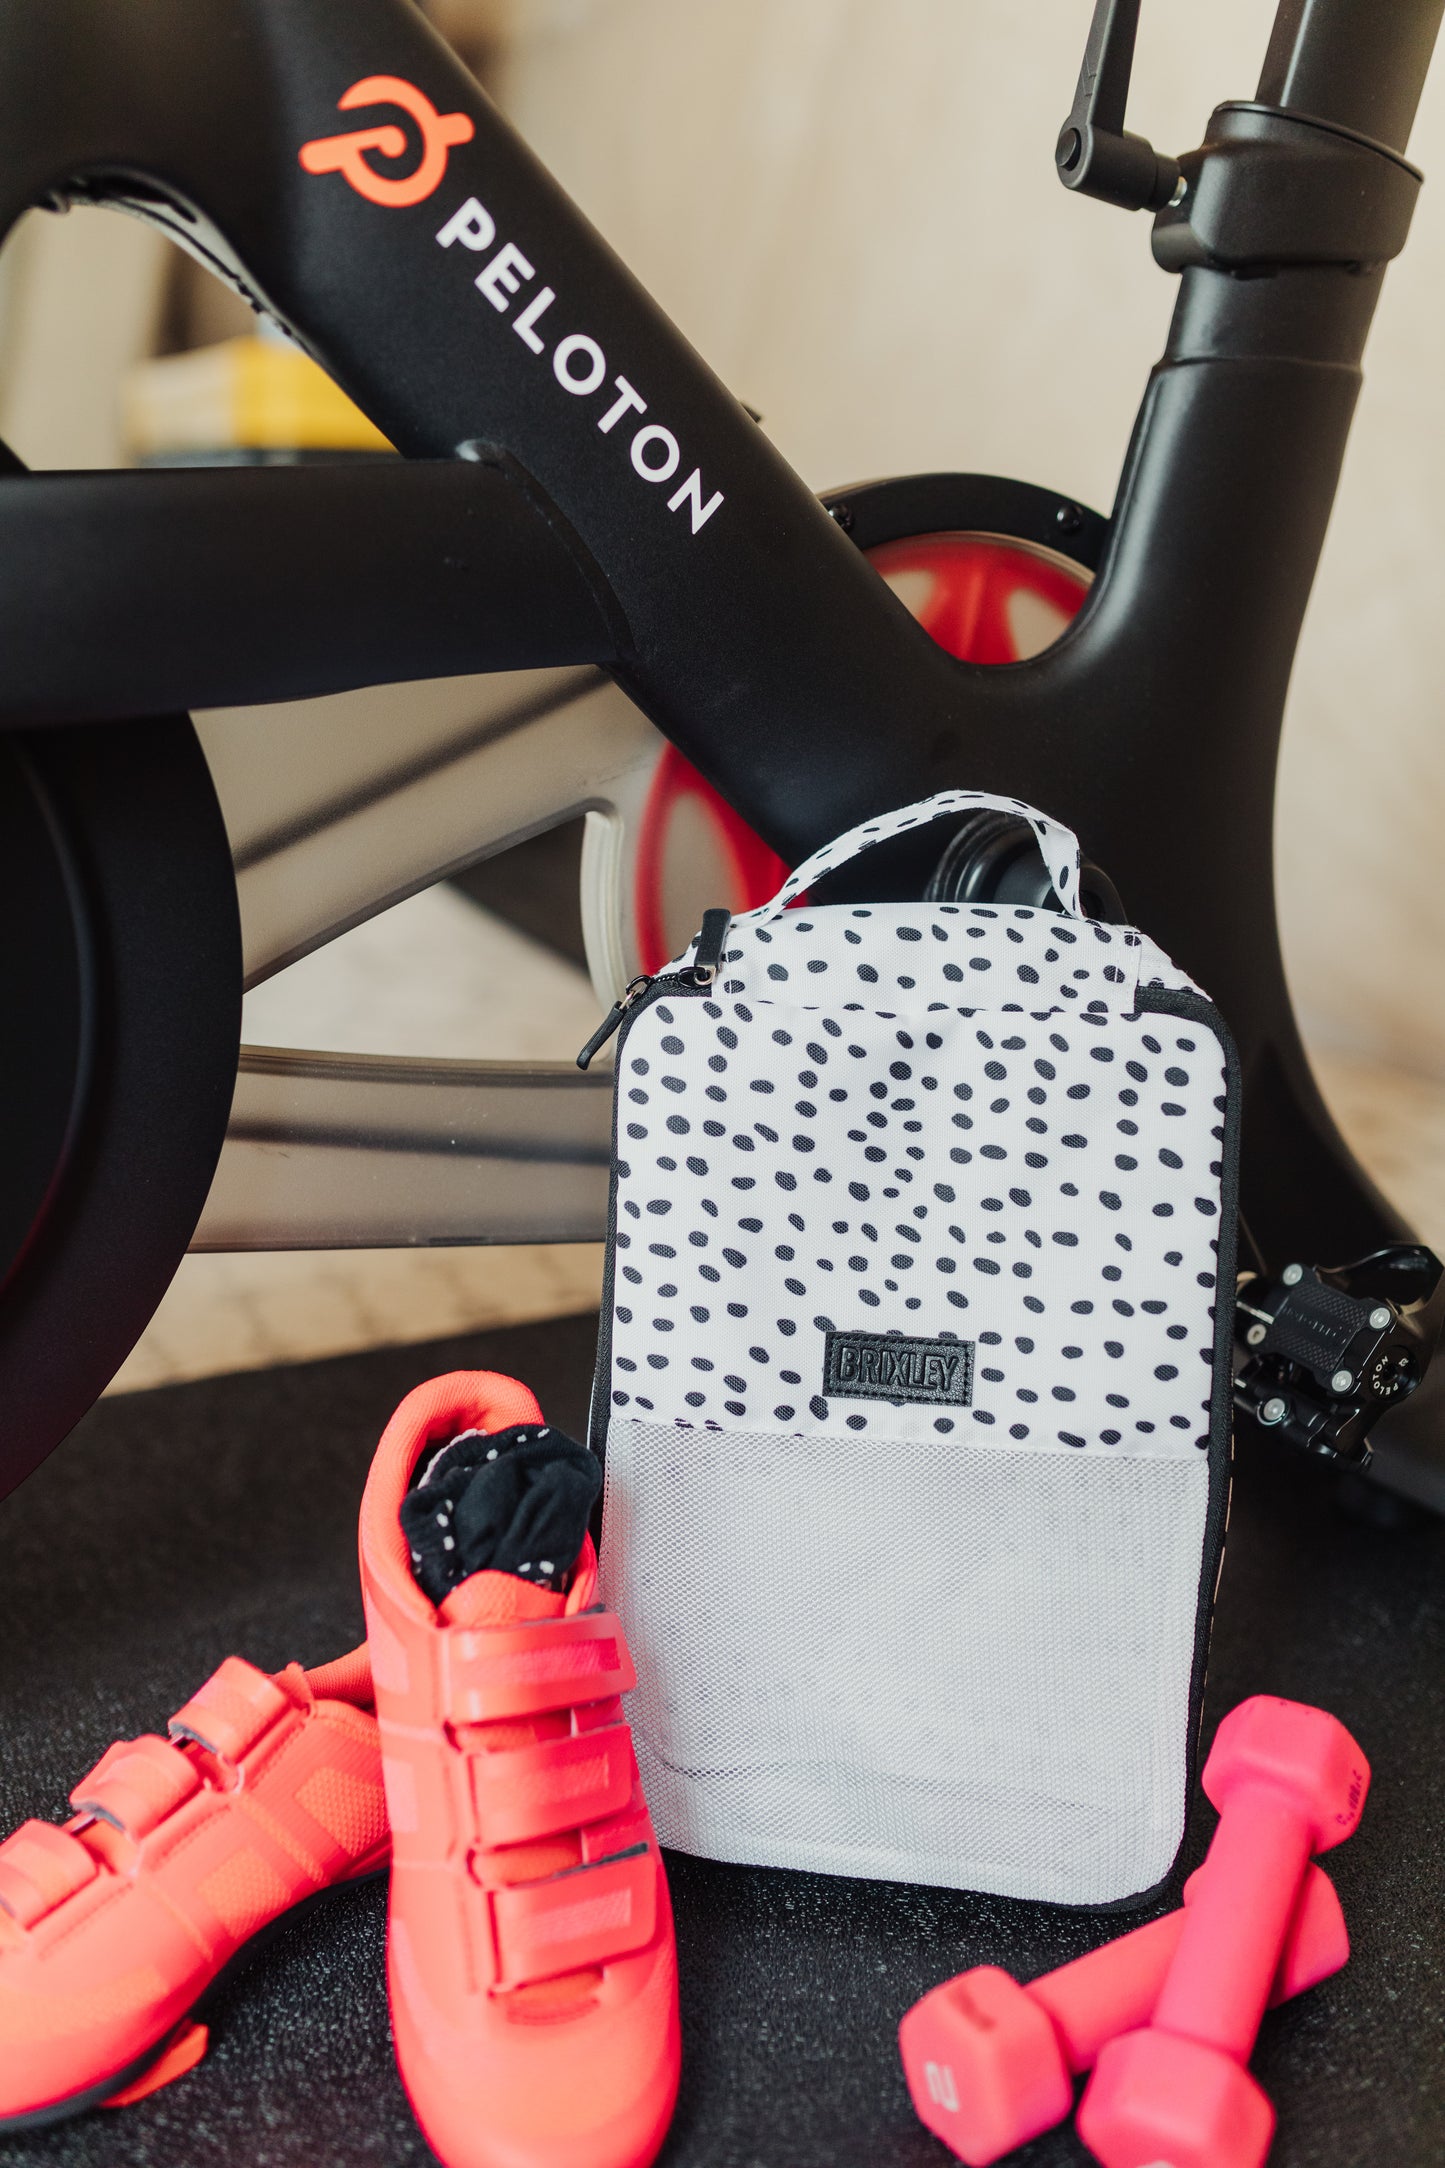 Dalmatian print Brixley Bags Packing Cube sitting next to pink workout gear and a Peloton